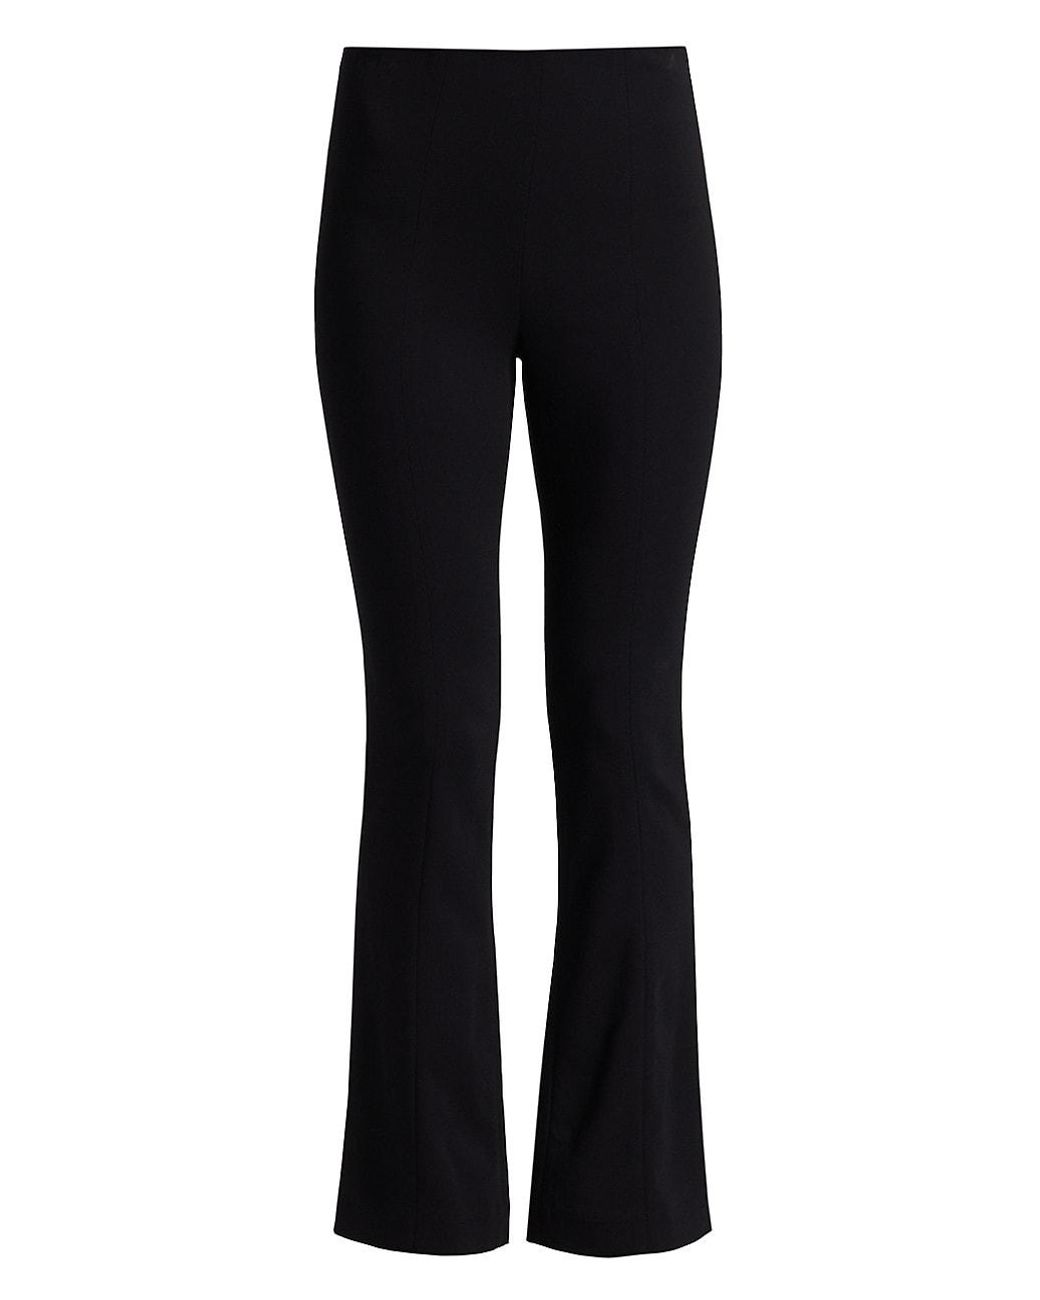 Co. Synthetic Bootcut Trousers in Black - Lyst